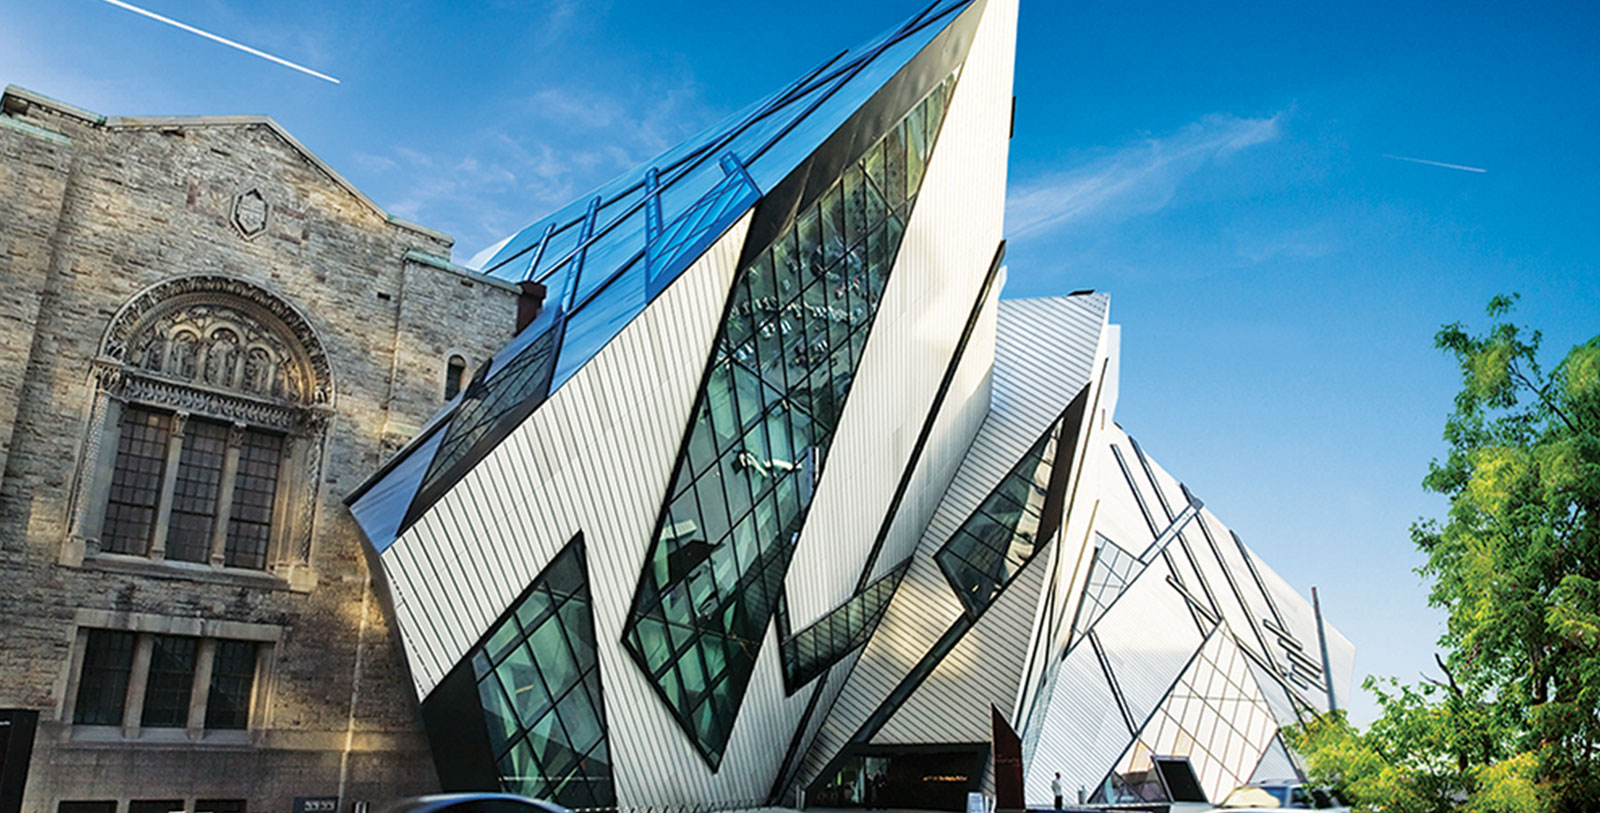 Explore the historic alleyways of the Royal Ontario Museum.